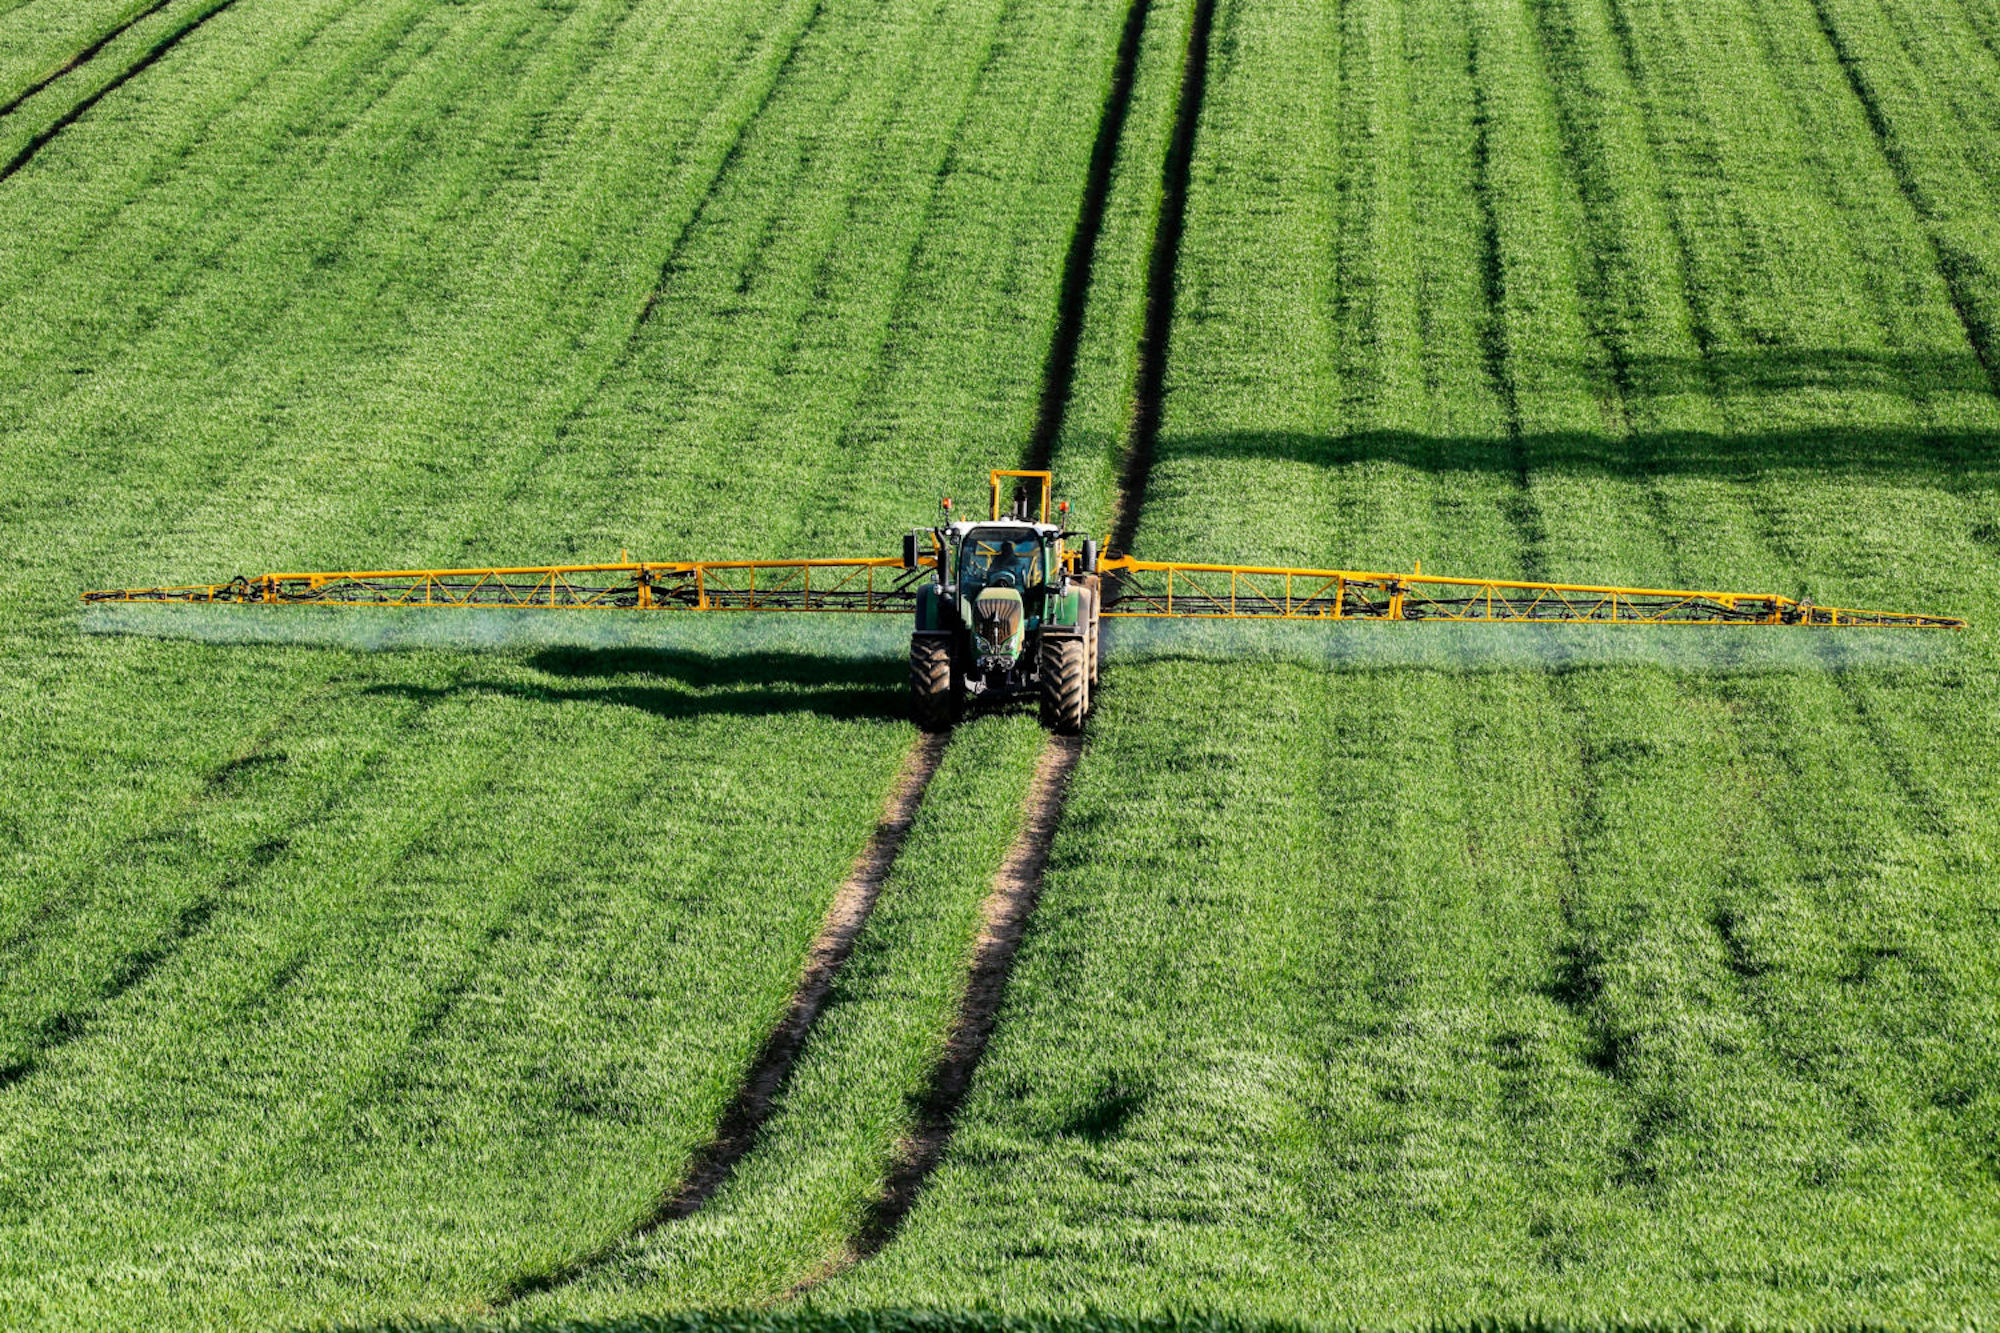 On a sunny day, a huge tractor sprays fertilizer on a green wheat field in England